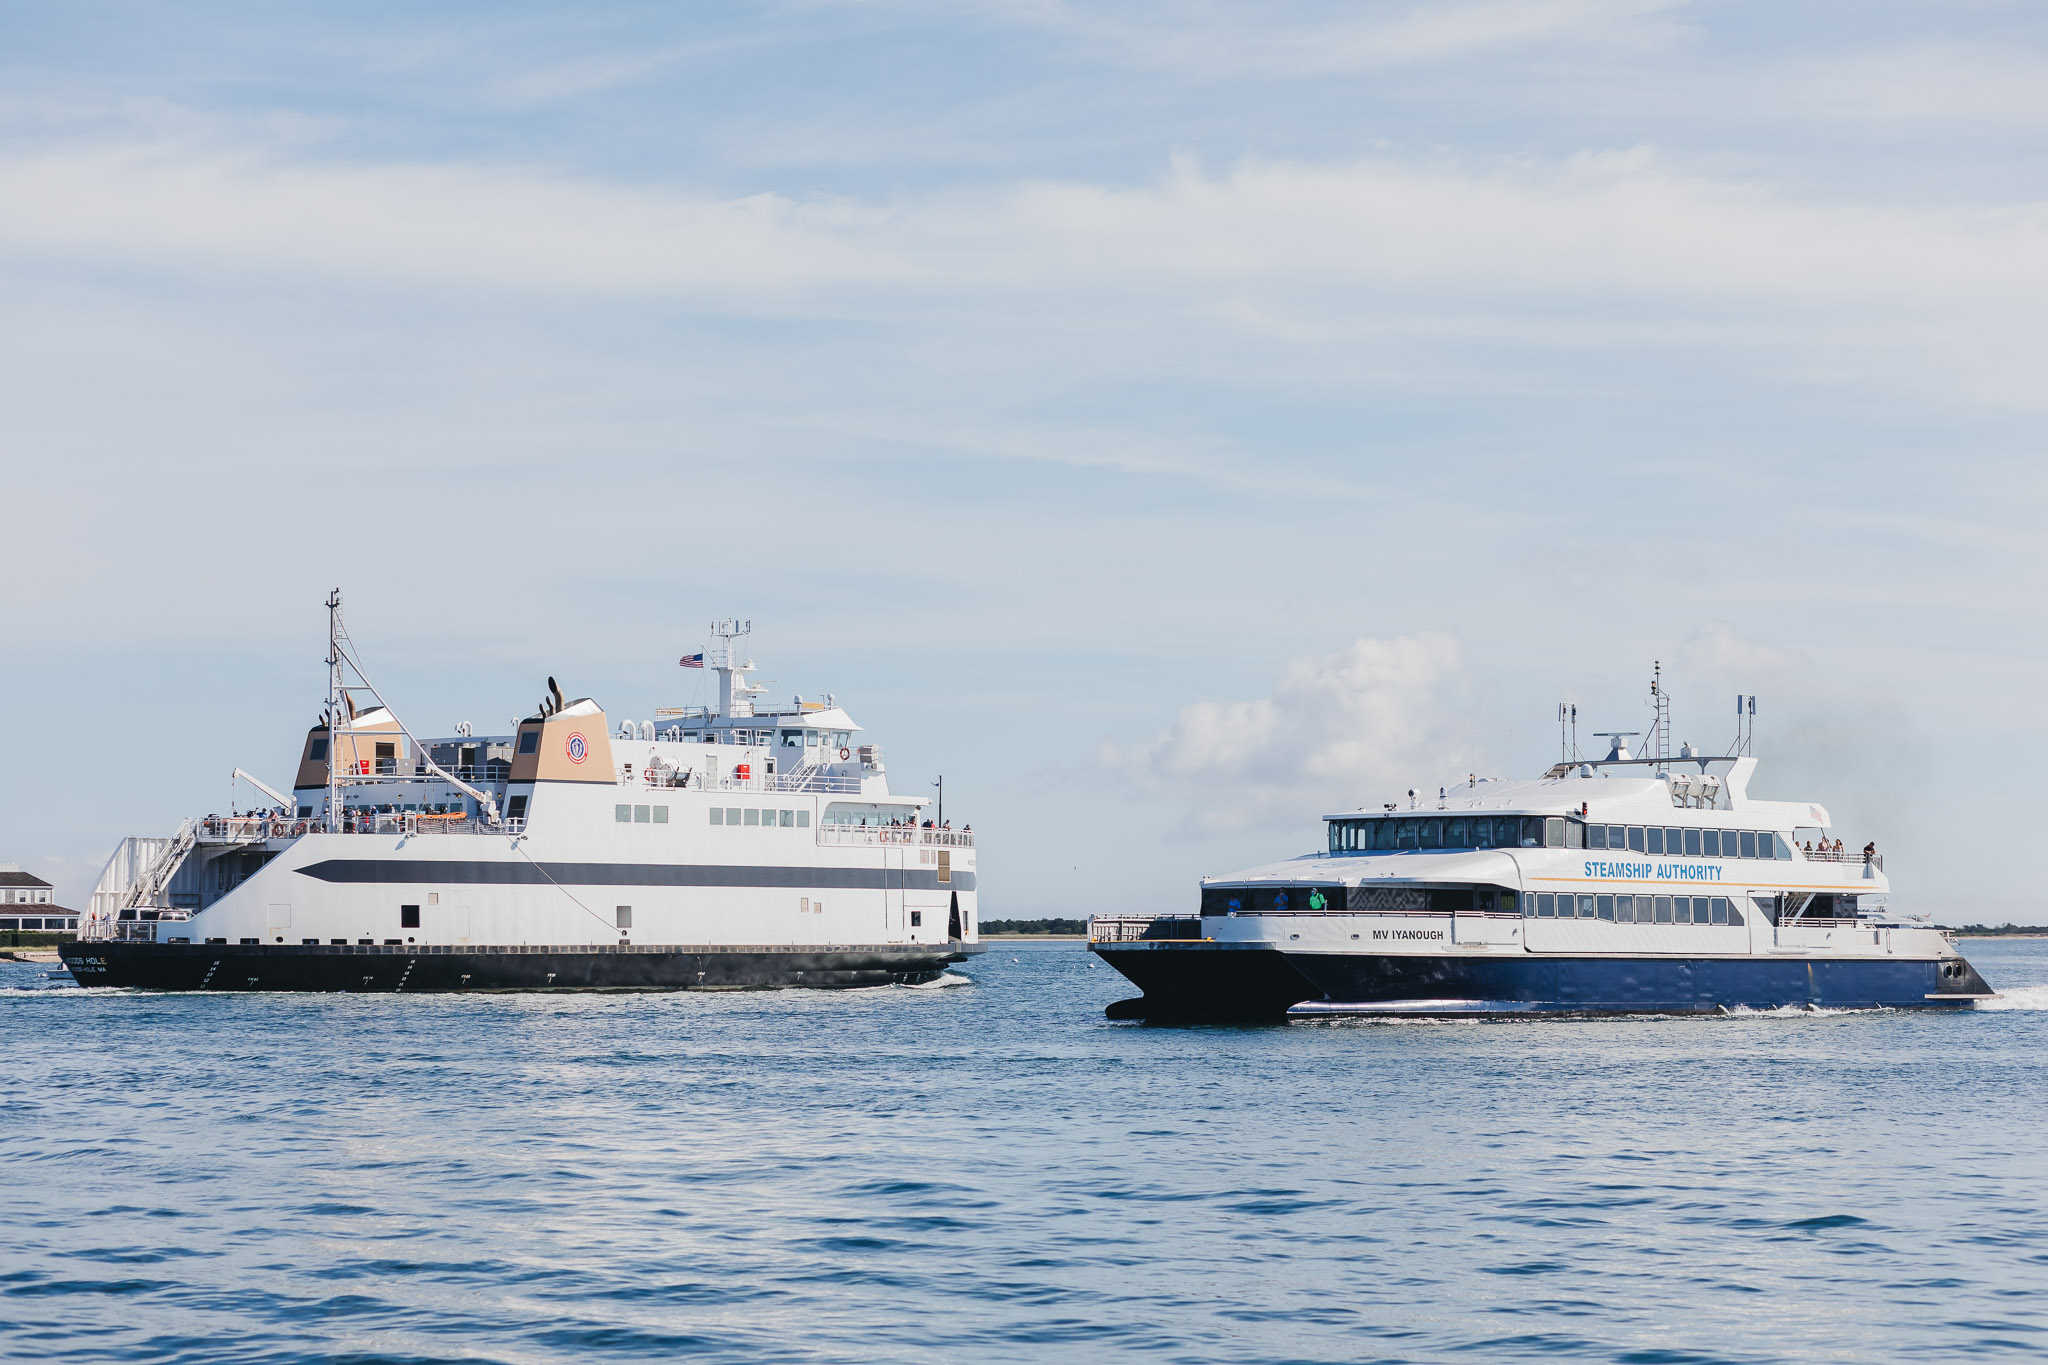 Hy-Line Cruises and the Steamship Authority: Nantucket’s Lifeline to